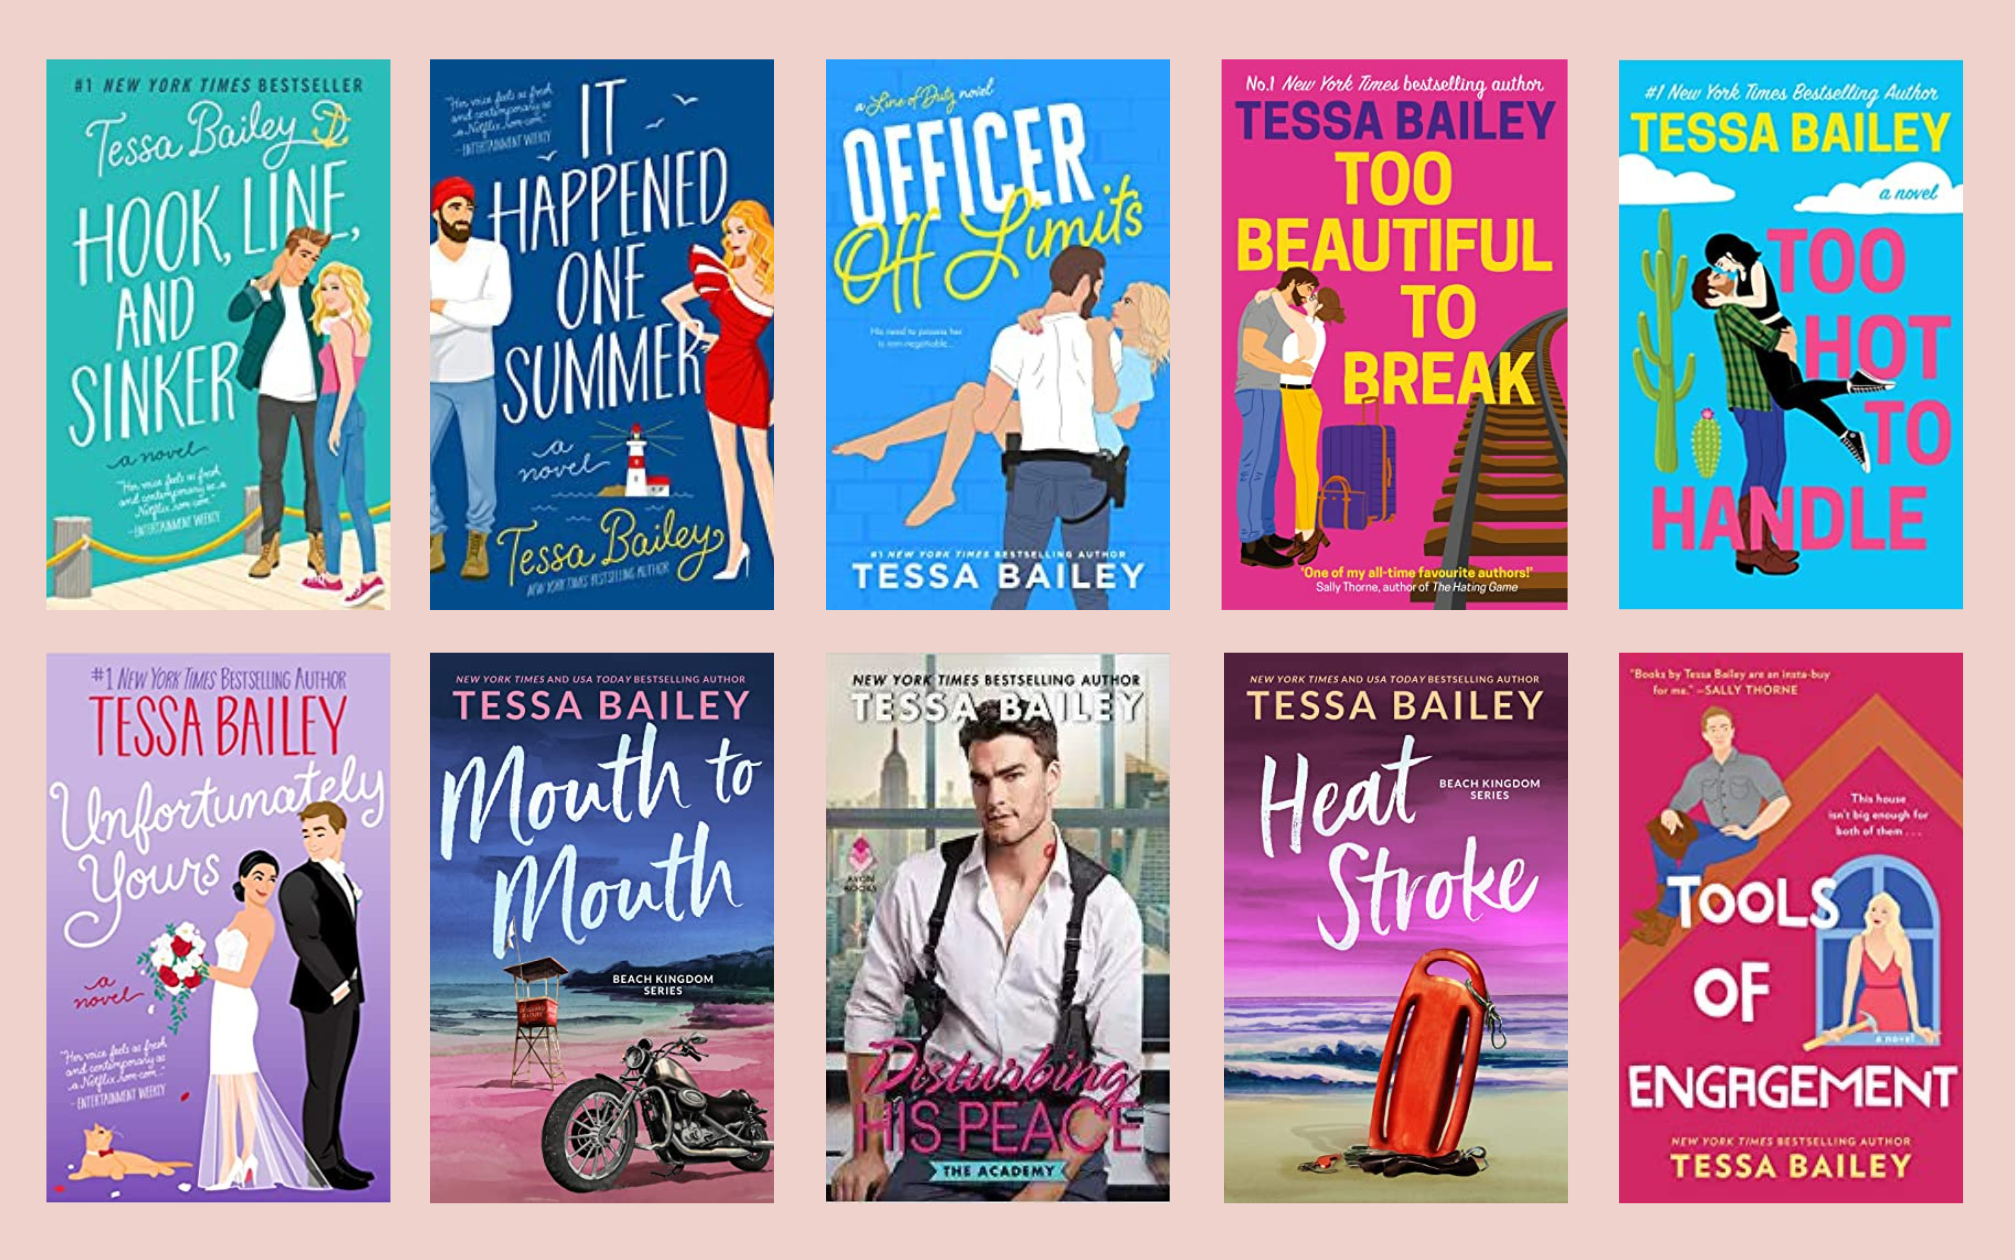 What was Tessa Bailey’s debut novel?